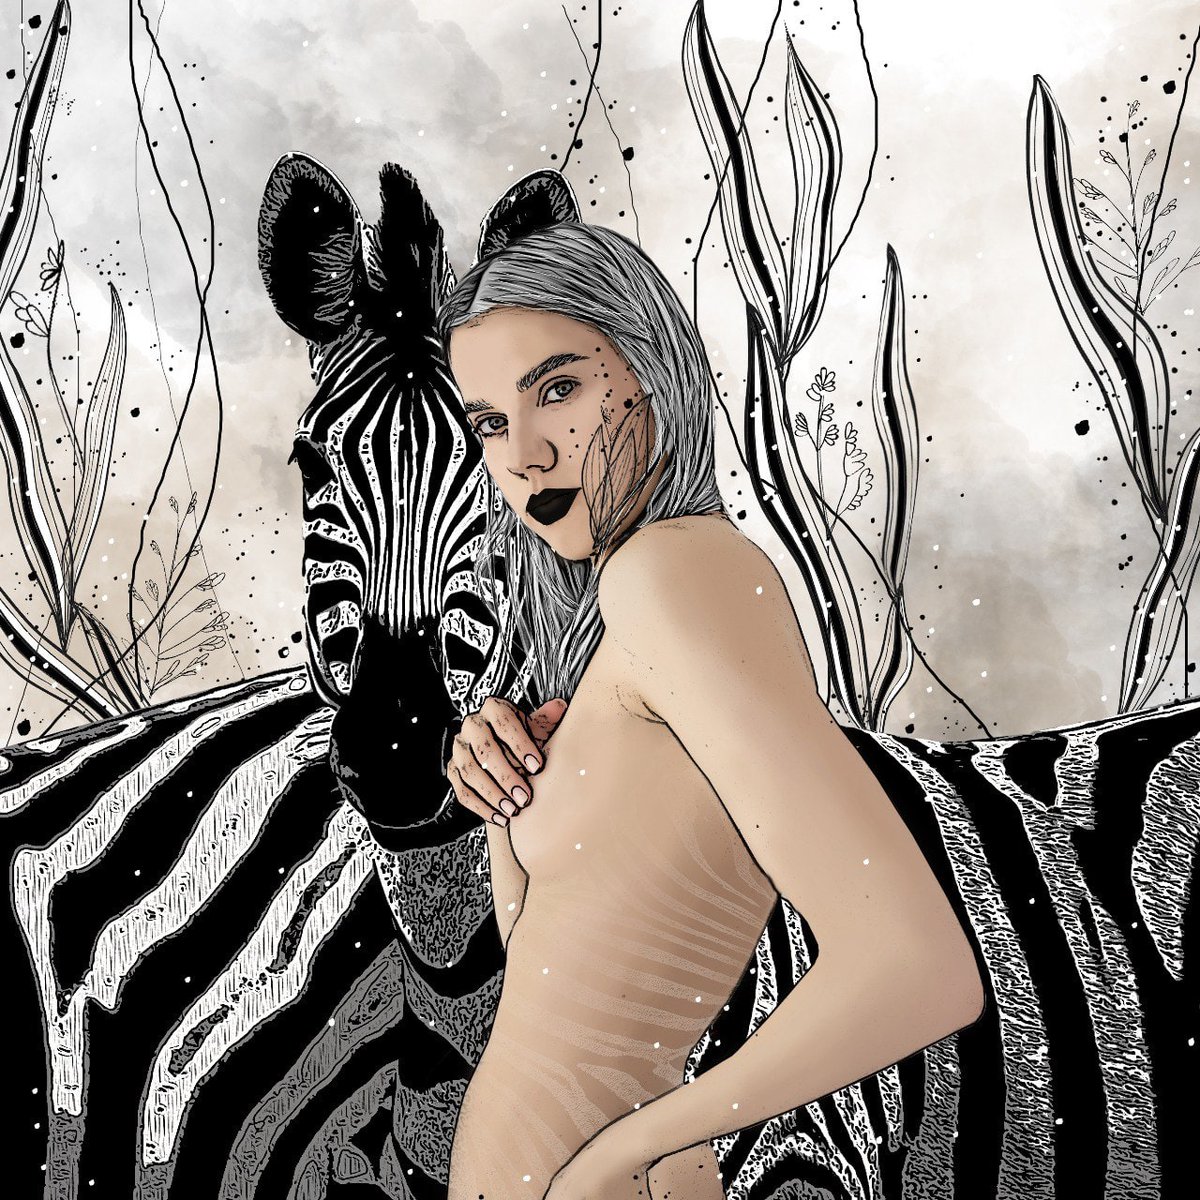 Gn & SOLD SOLD SOLD🥳 2 editions more of 'Amongst the Zebras' sold to dear @Shakazamm and the loveliest Nikki @cozmonika_art ❤❤ Thank you so much, much appreciate your support and kindness 🤍🦓 4/10 editions left !!👀 1.7 $xtz